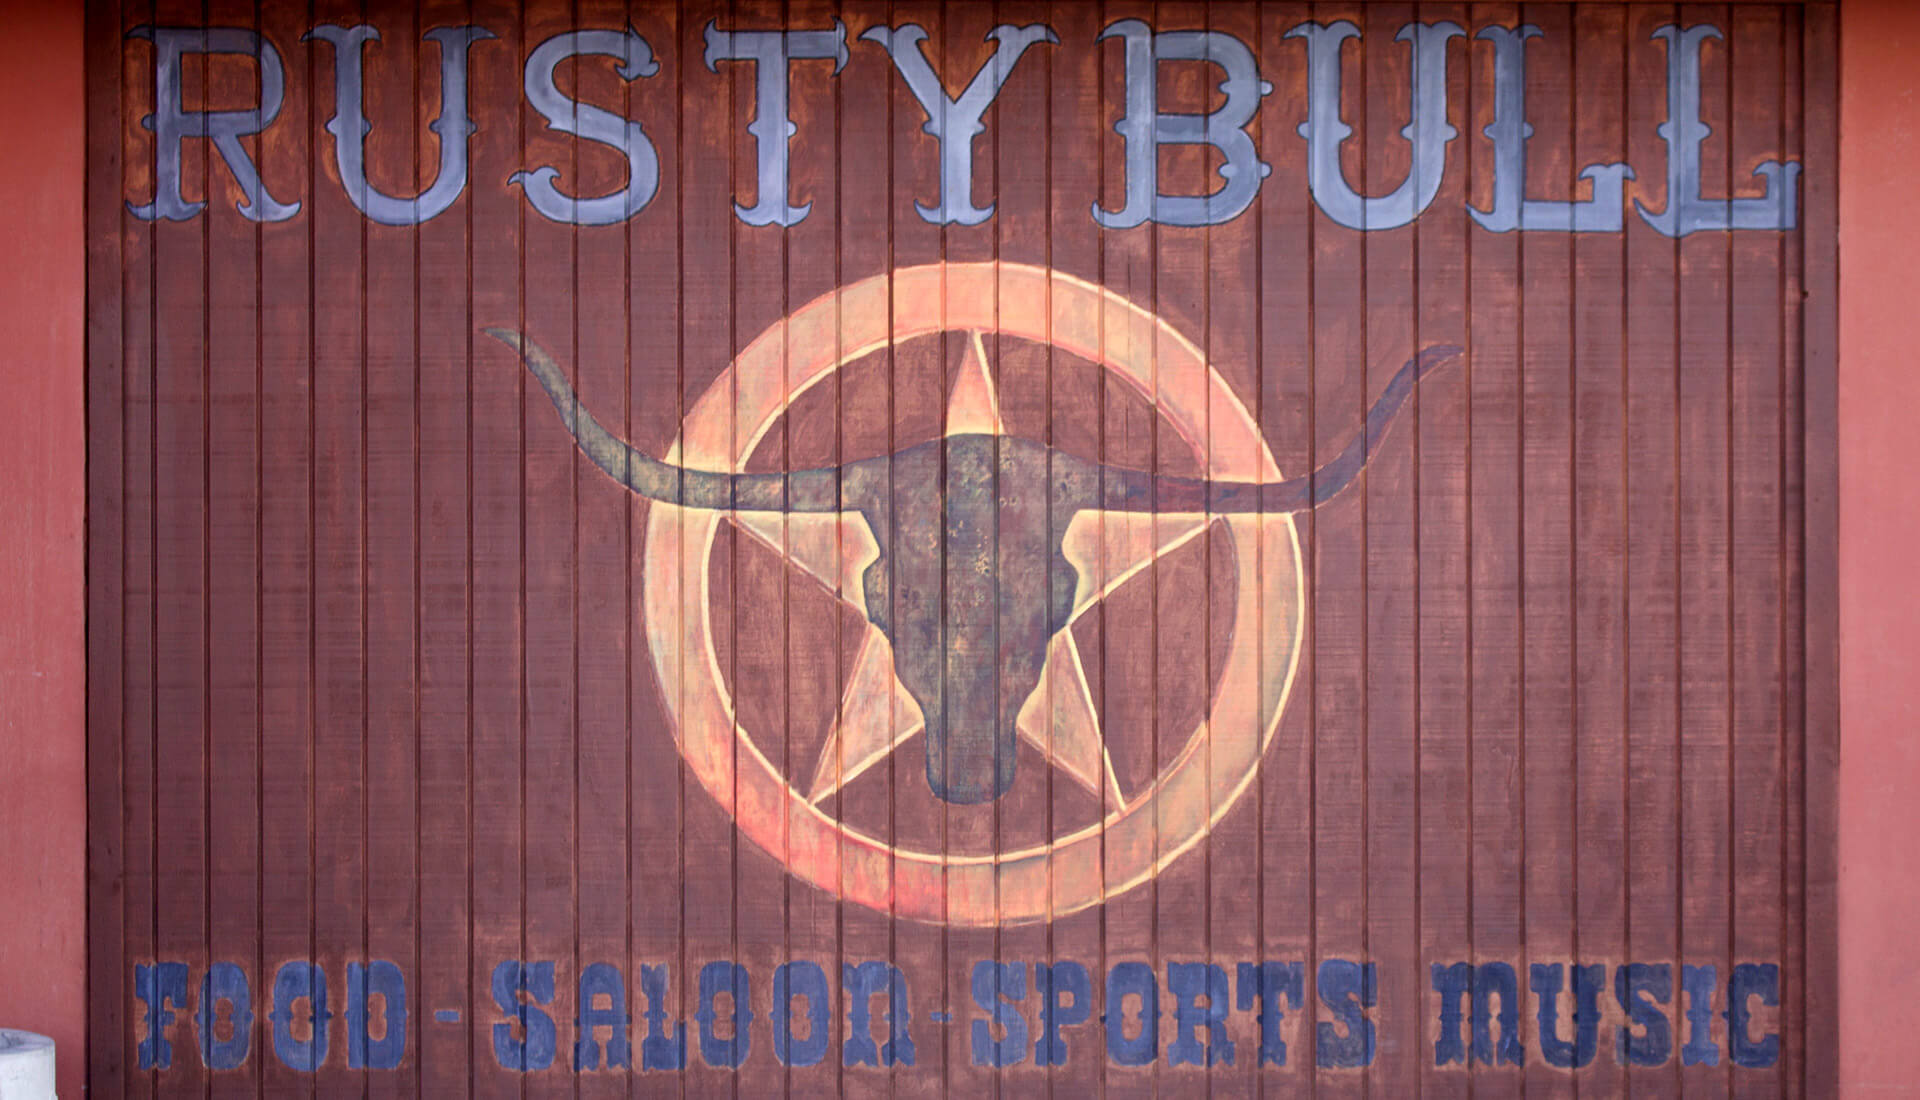 Rusty Bull Roadhouse Sign with the words Food, Saloon, Sports and Music 